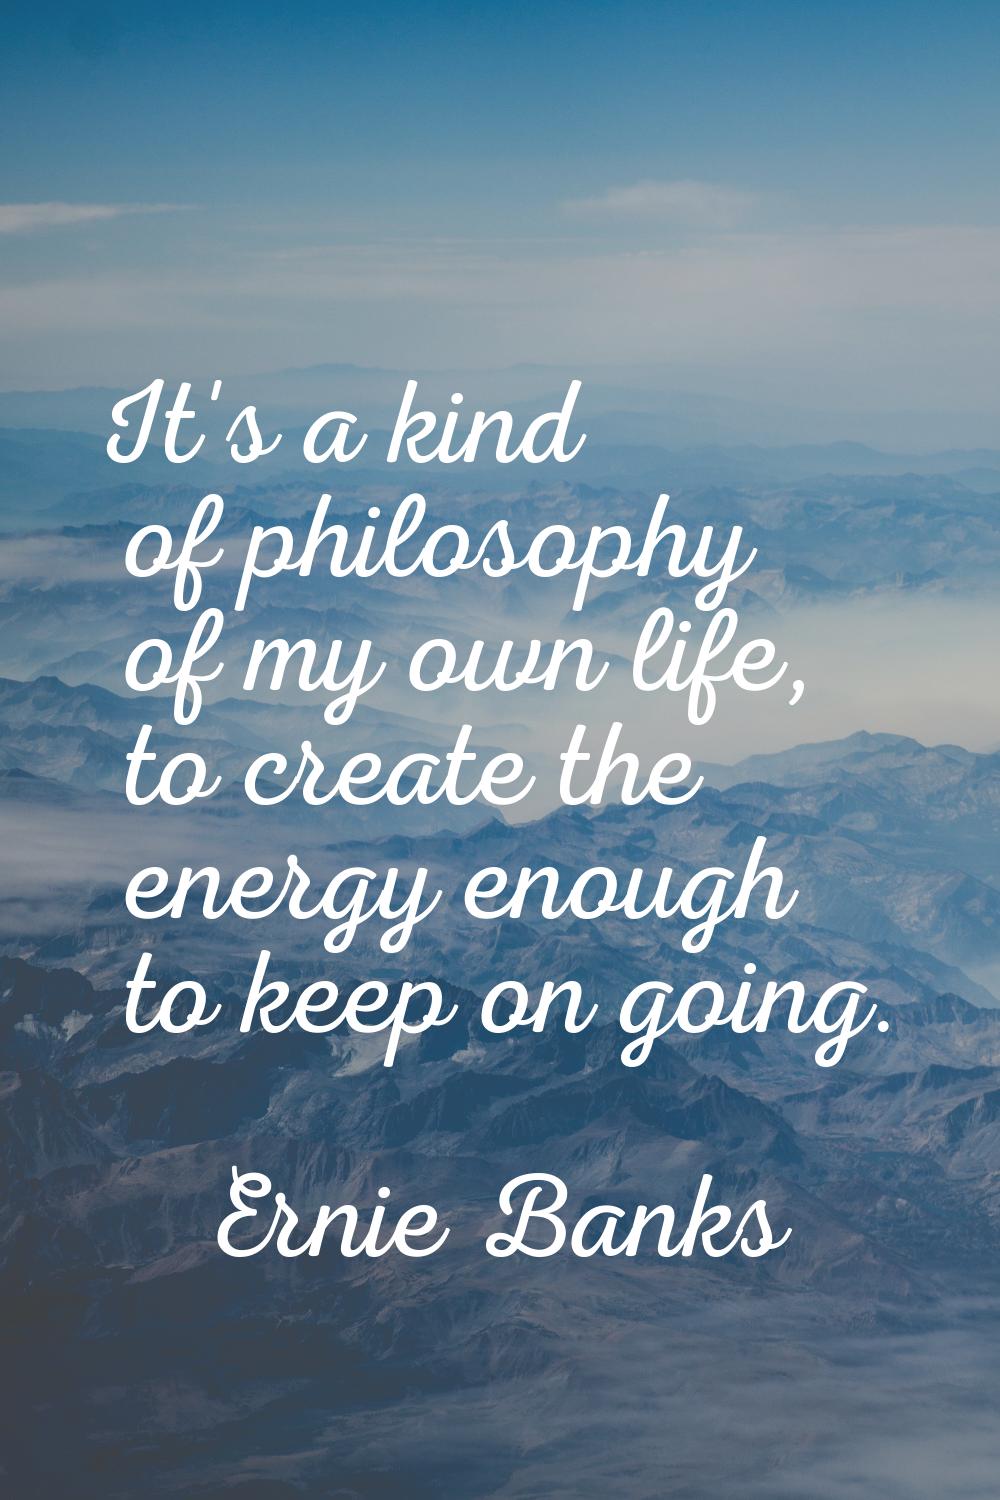 It's a kind of philosophy of my own life, to create the energy enough to keep on going.